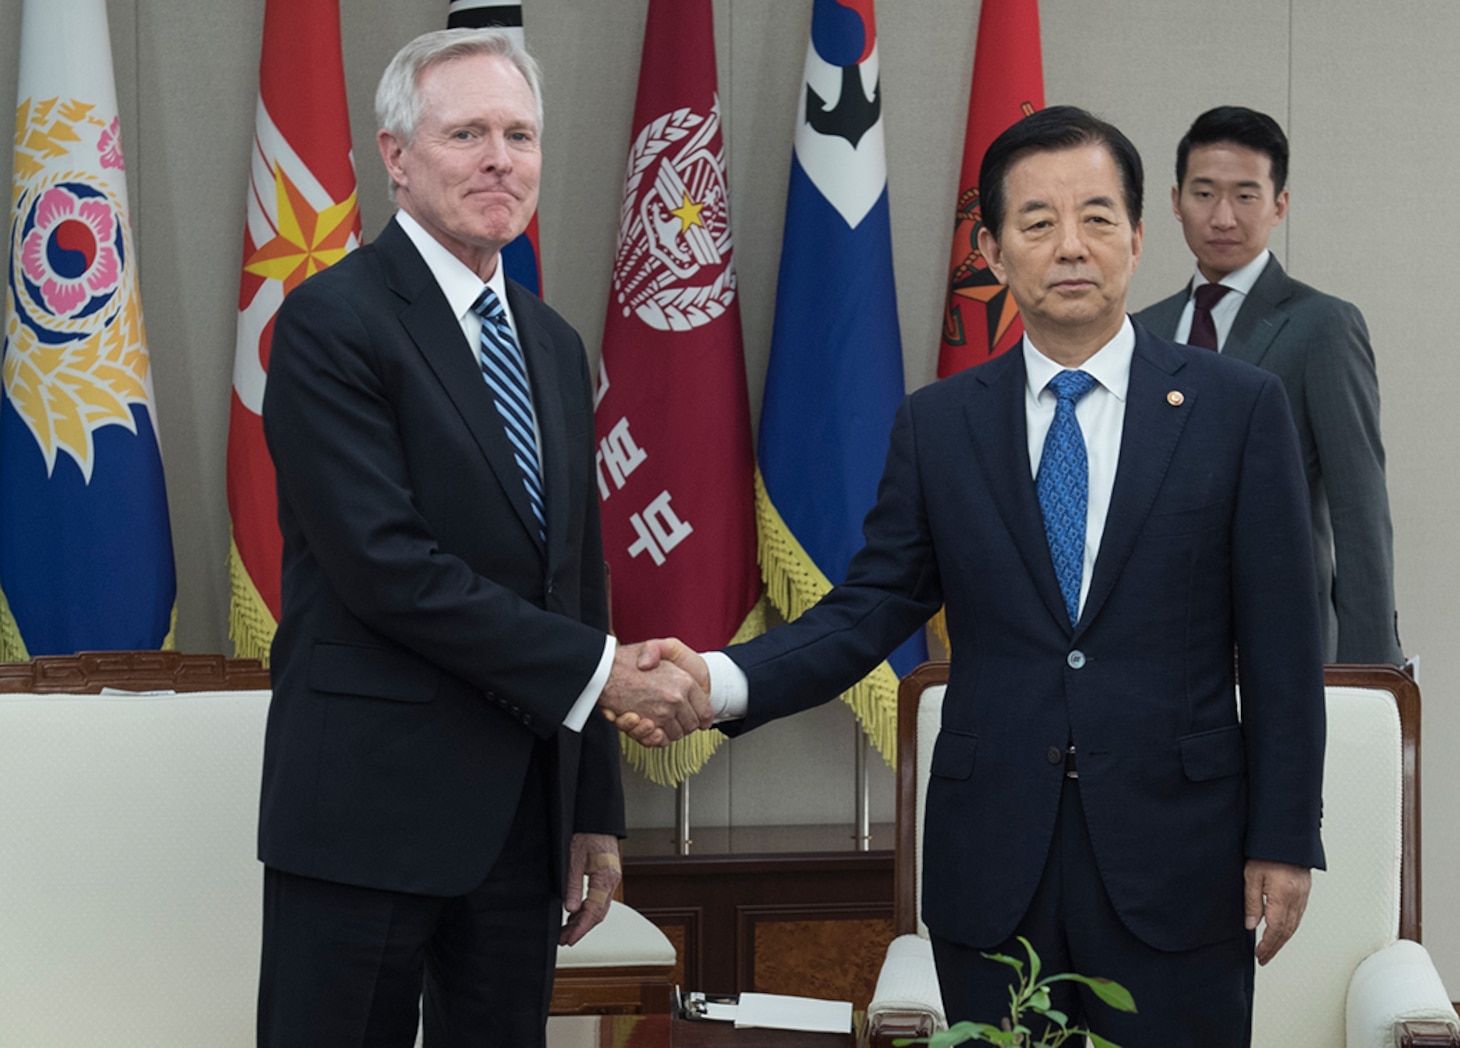 Secretary of the Navy (SECNAV) Ray Mabus meets with Korea Minister of Defense Han Min-koo in Seoul, Aug. 19, 2016. Mabus is in the region to meet with Sailors and Marines, and civilian and military officials, as part of a multi-nation visit to the U.S. Pacific region. 